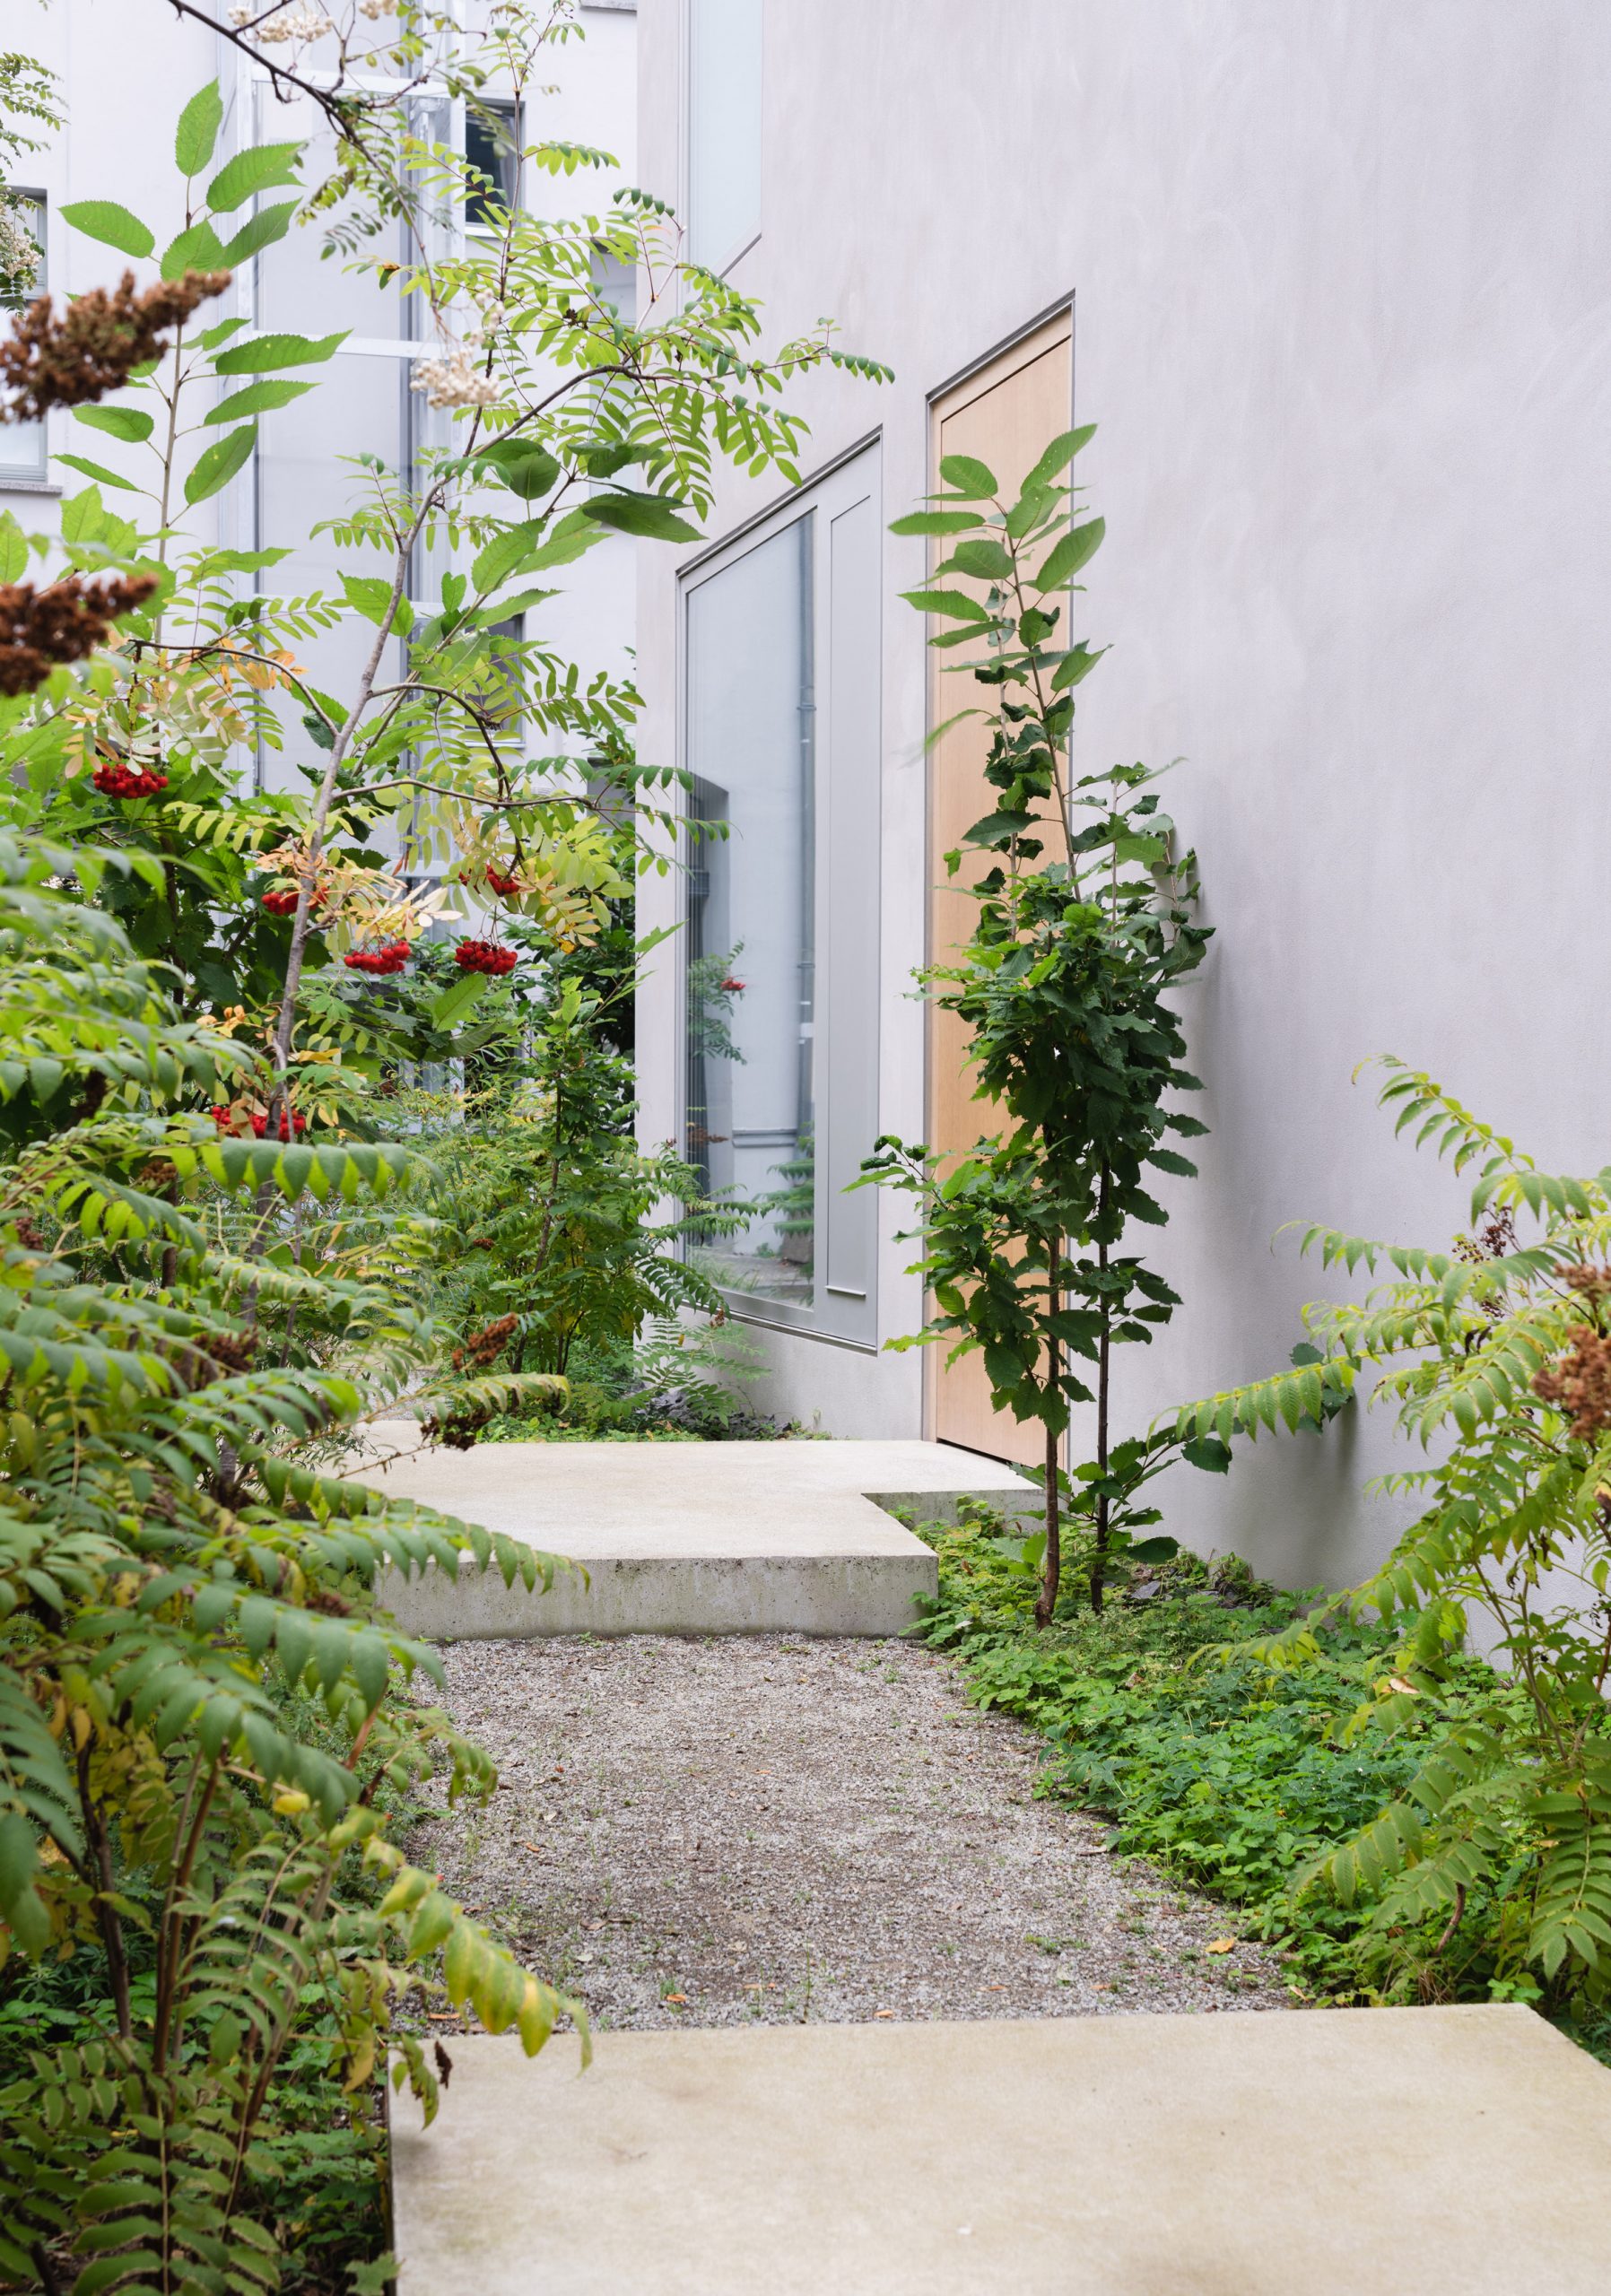 Greenery surrounds the paths into the home